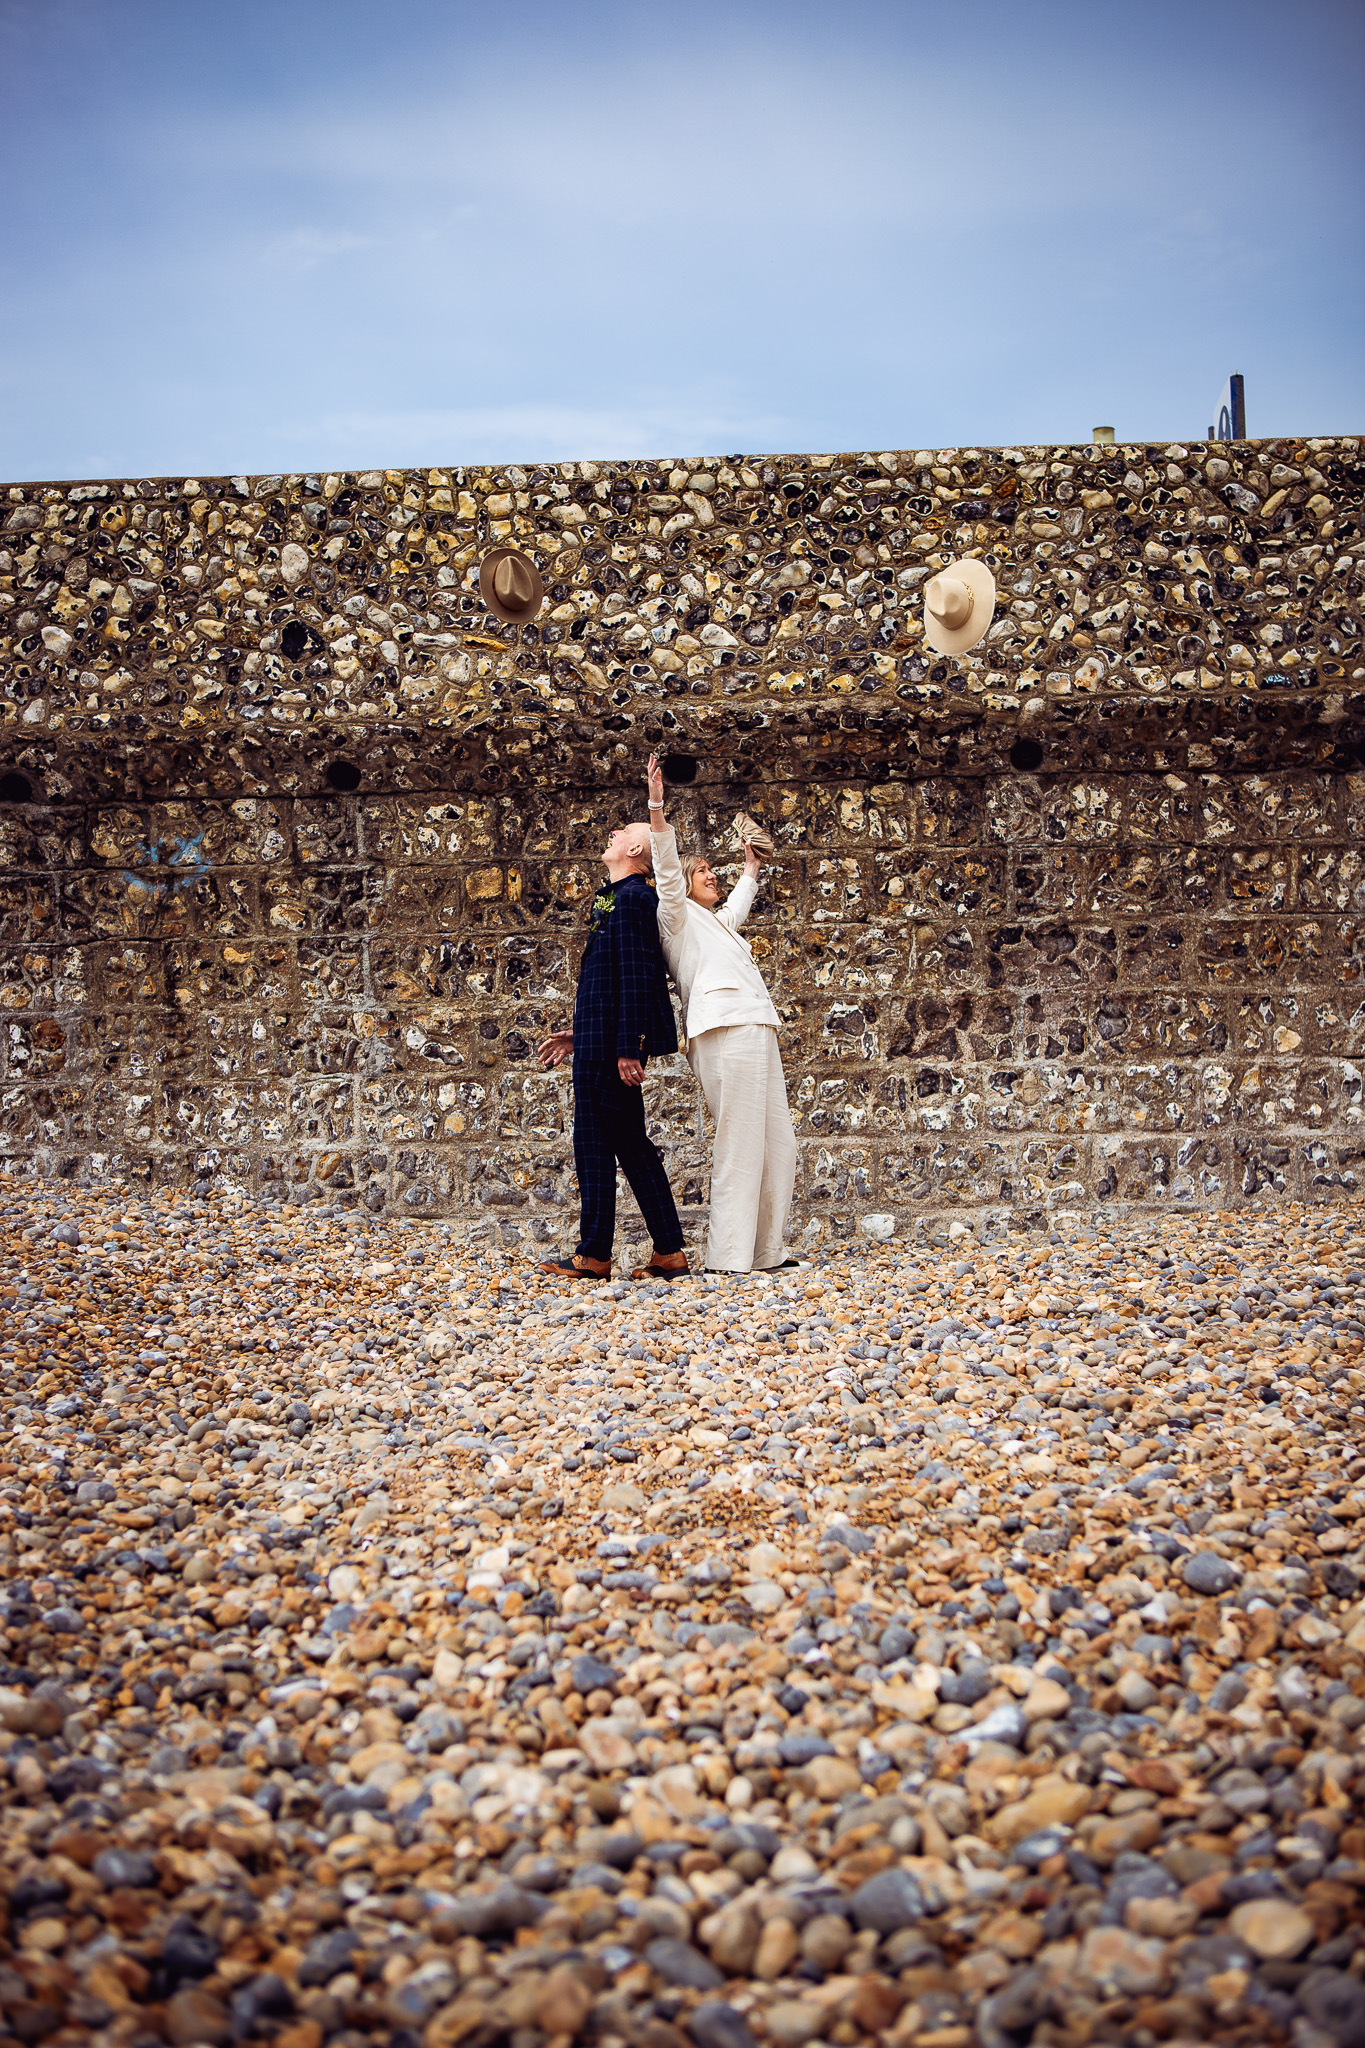 Mike and Mary throw their fedoras in the air during their wedding couple portrait session on Brighton beach.